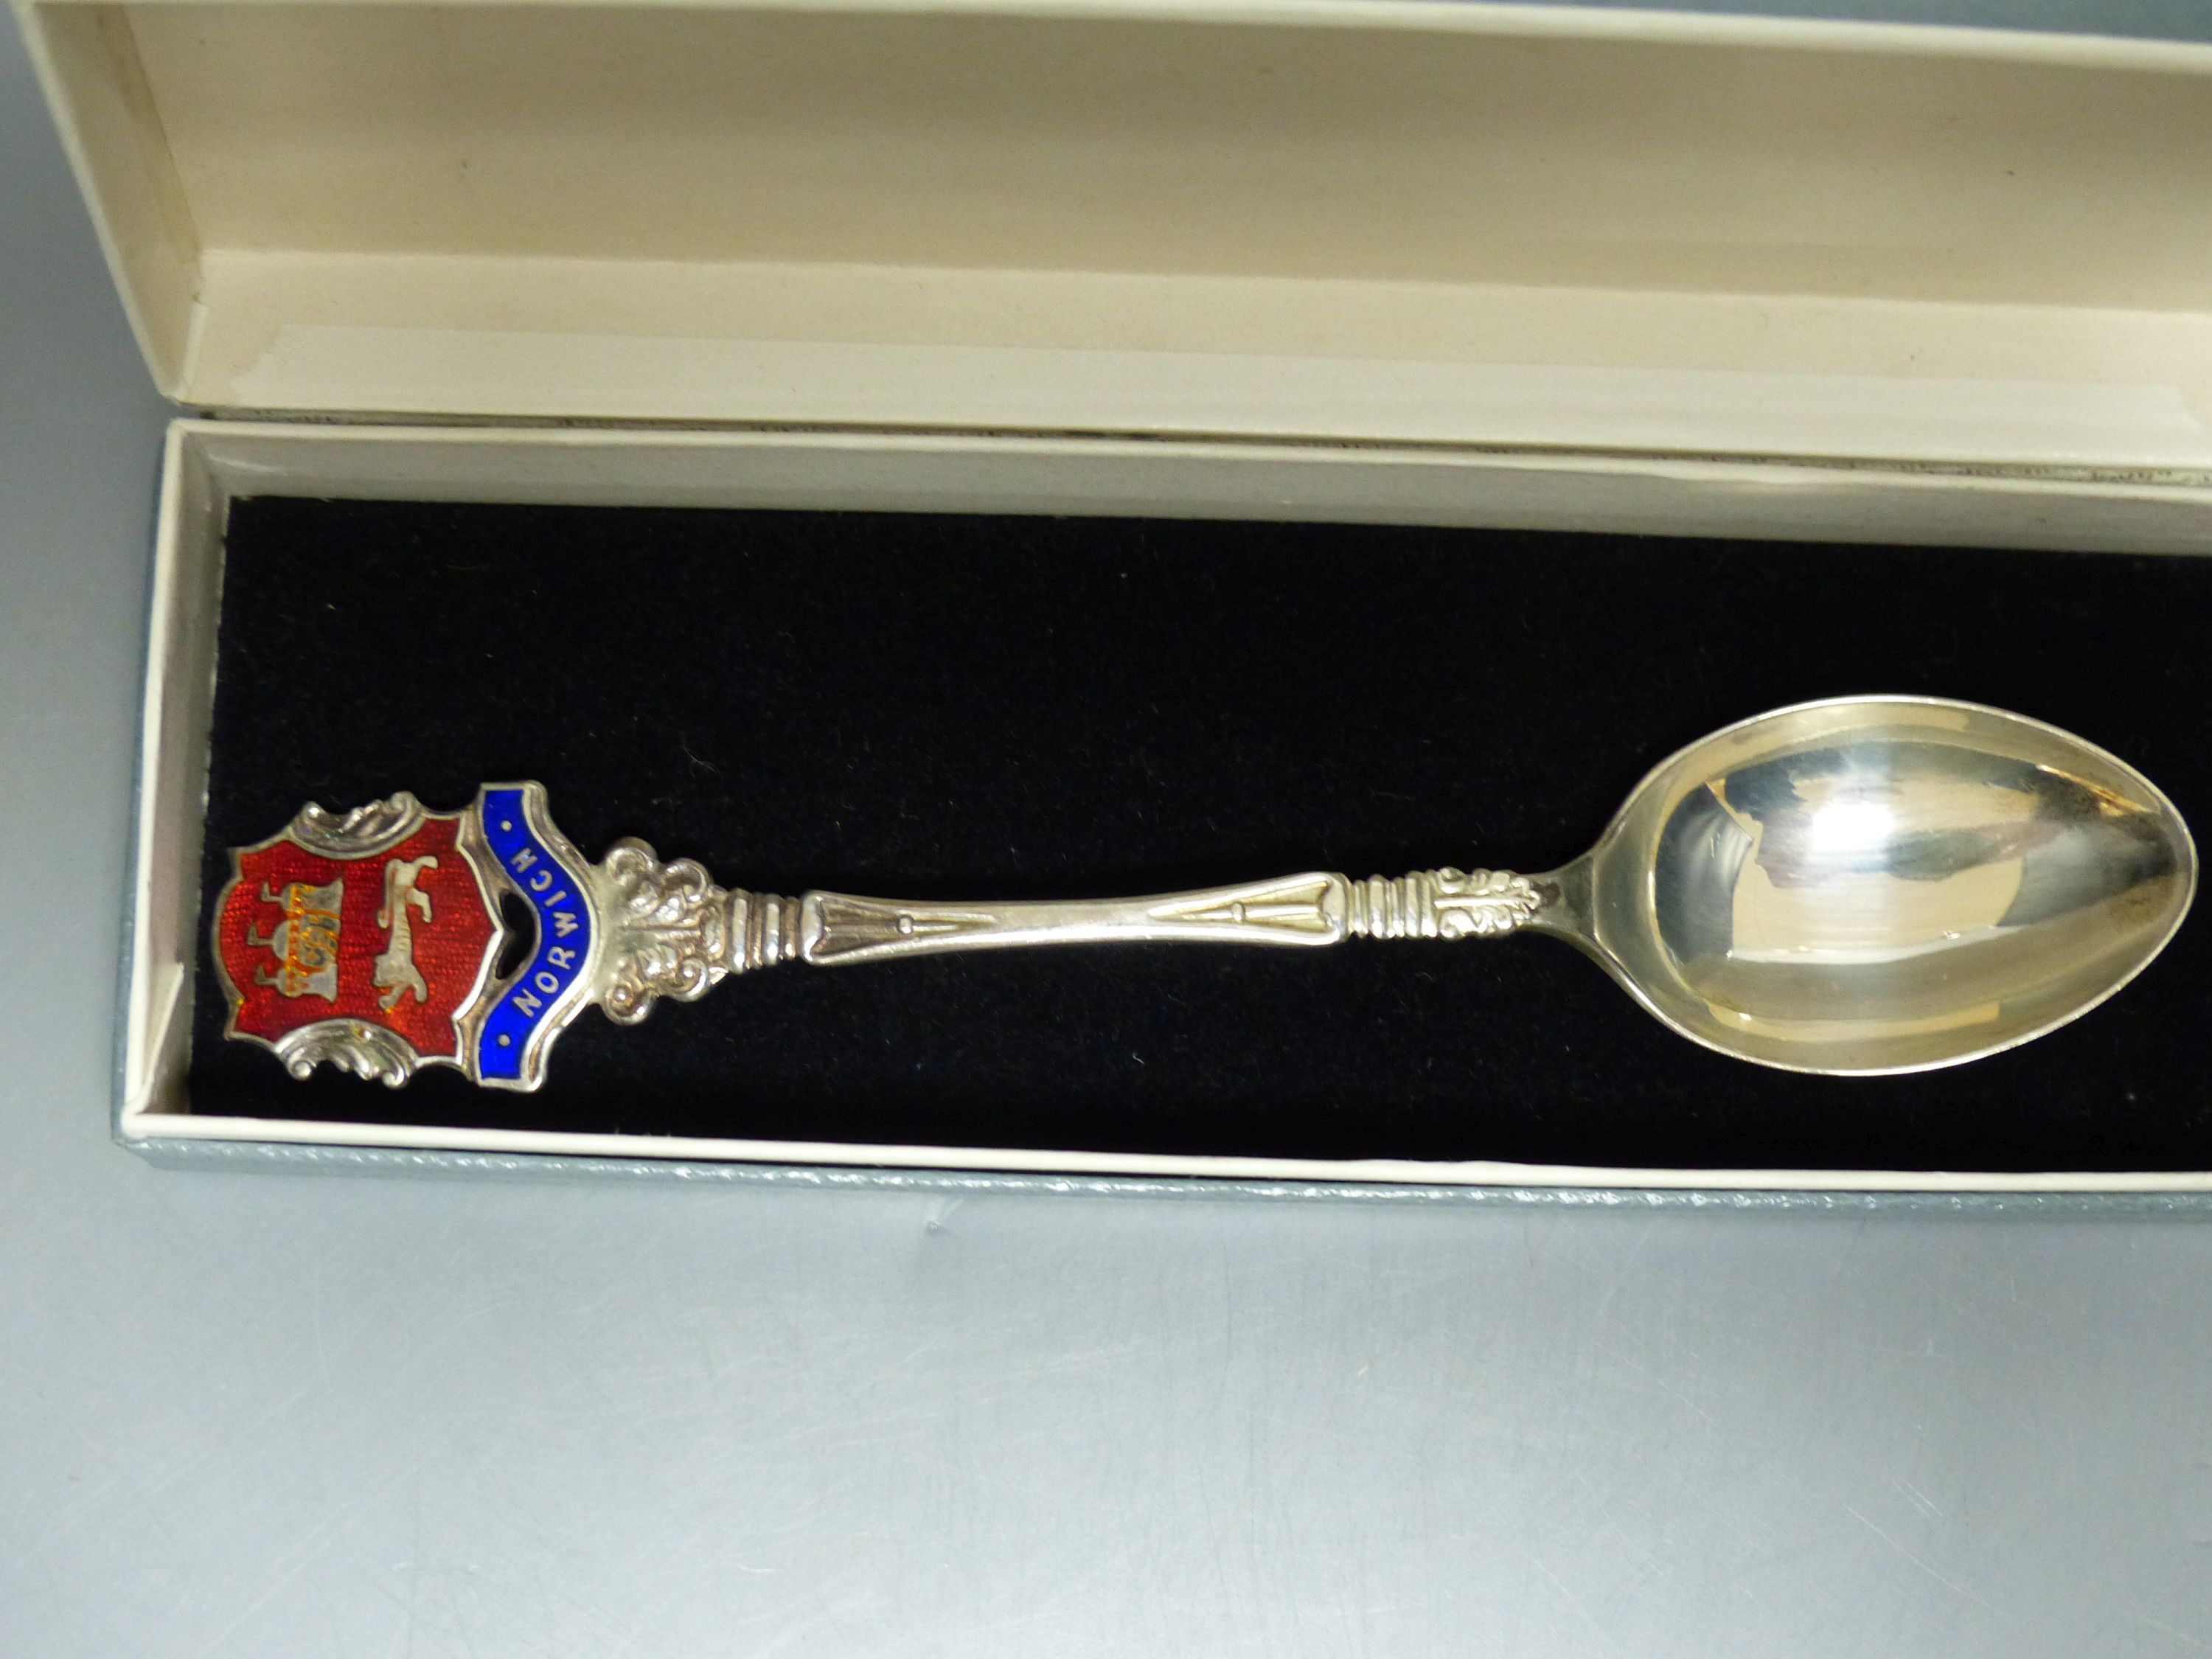 A set of silver limited edition 'Tichborne' spoons, cased and a collection of silver and enamel souvenir spoons